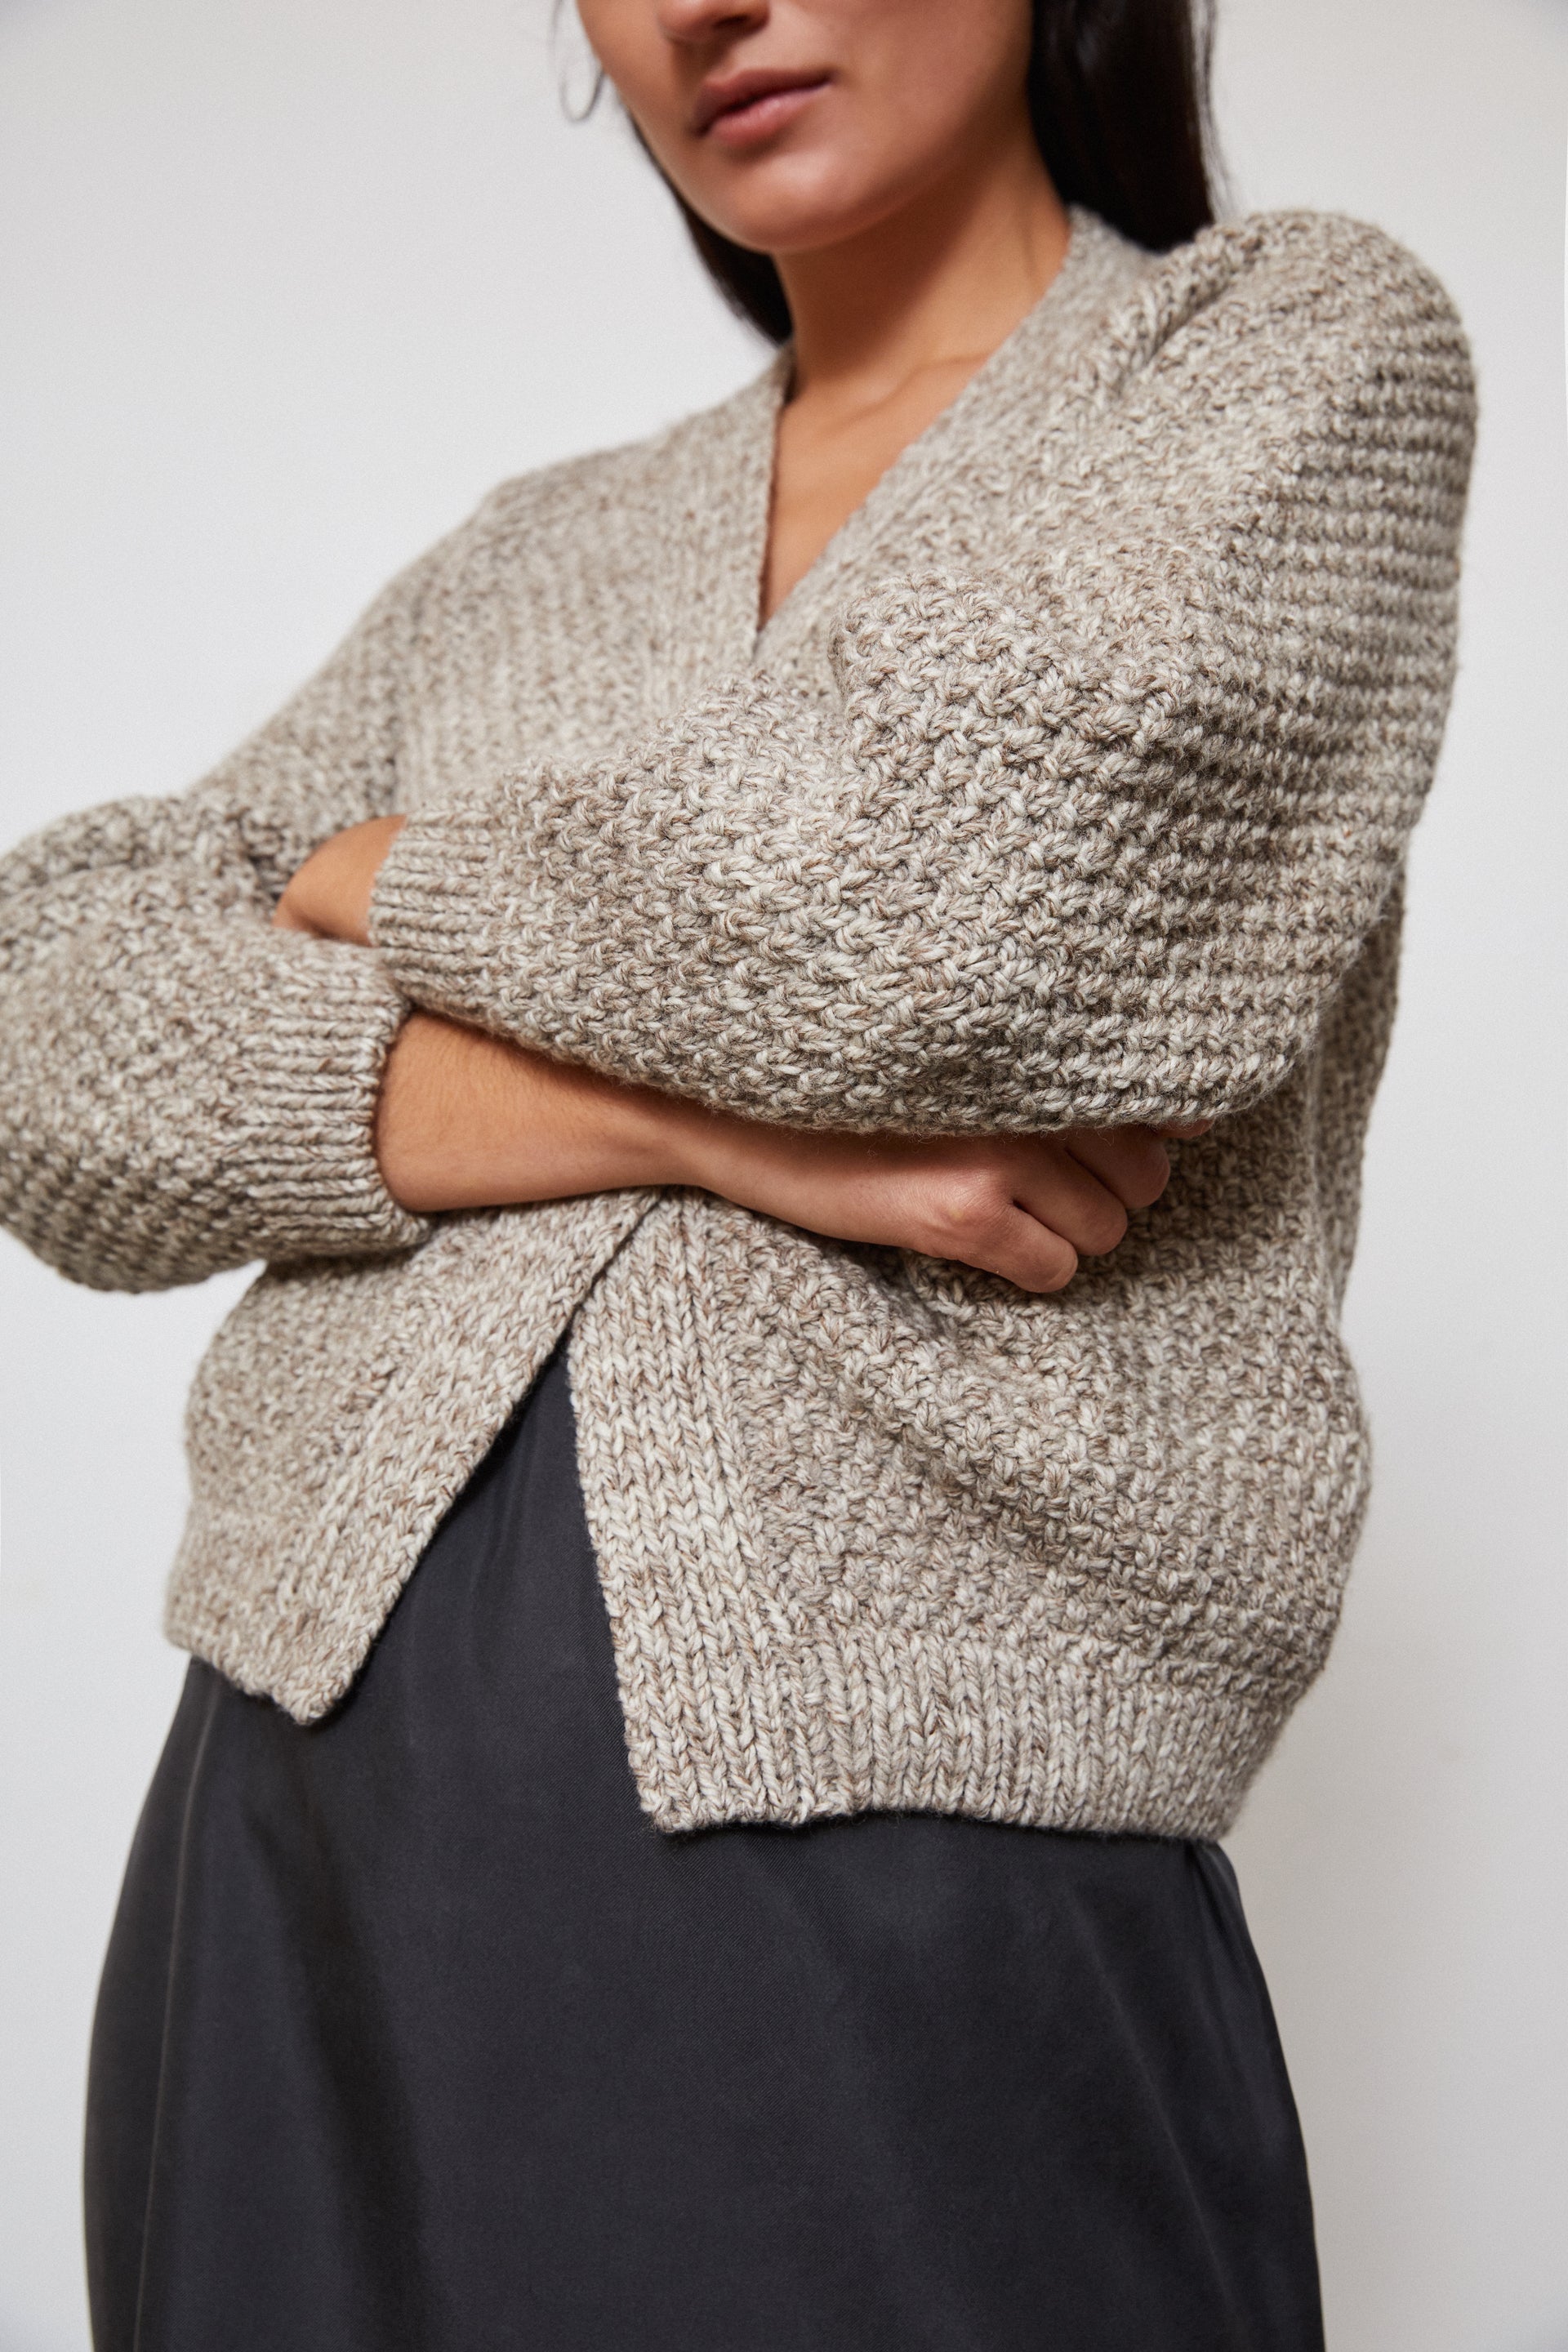 UNDYED, WOOL, HAND KNITTED, CARDIGAN, STYLISH, SUSTAINABLE, HAND-CRAFTED, WOMENSWEAR